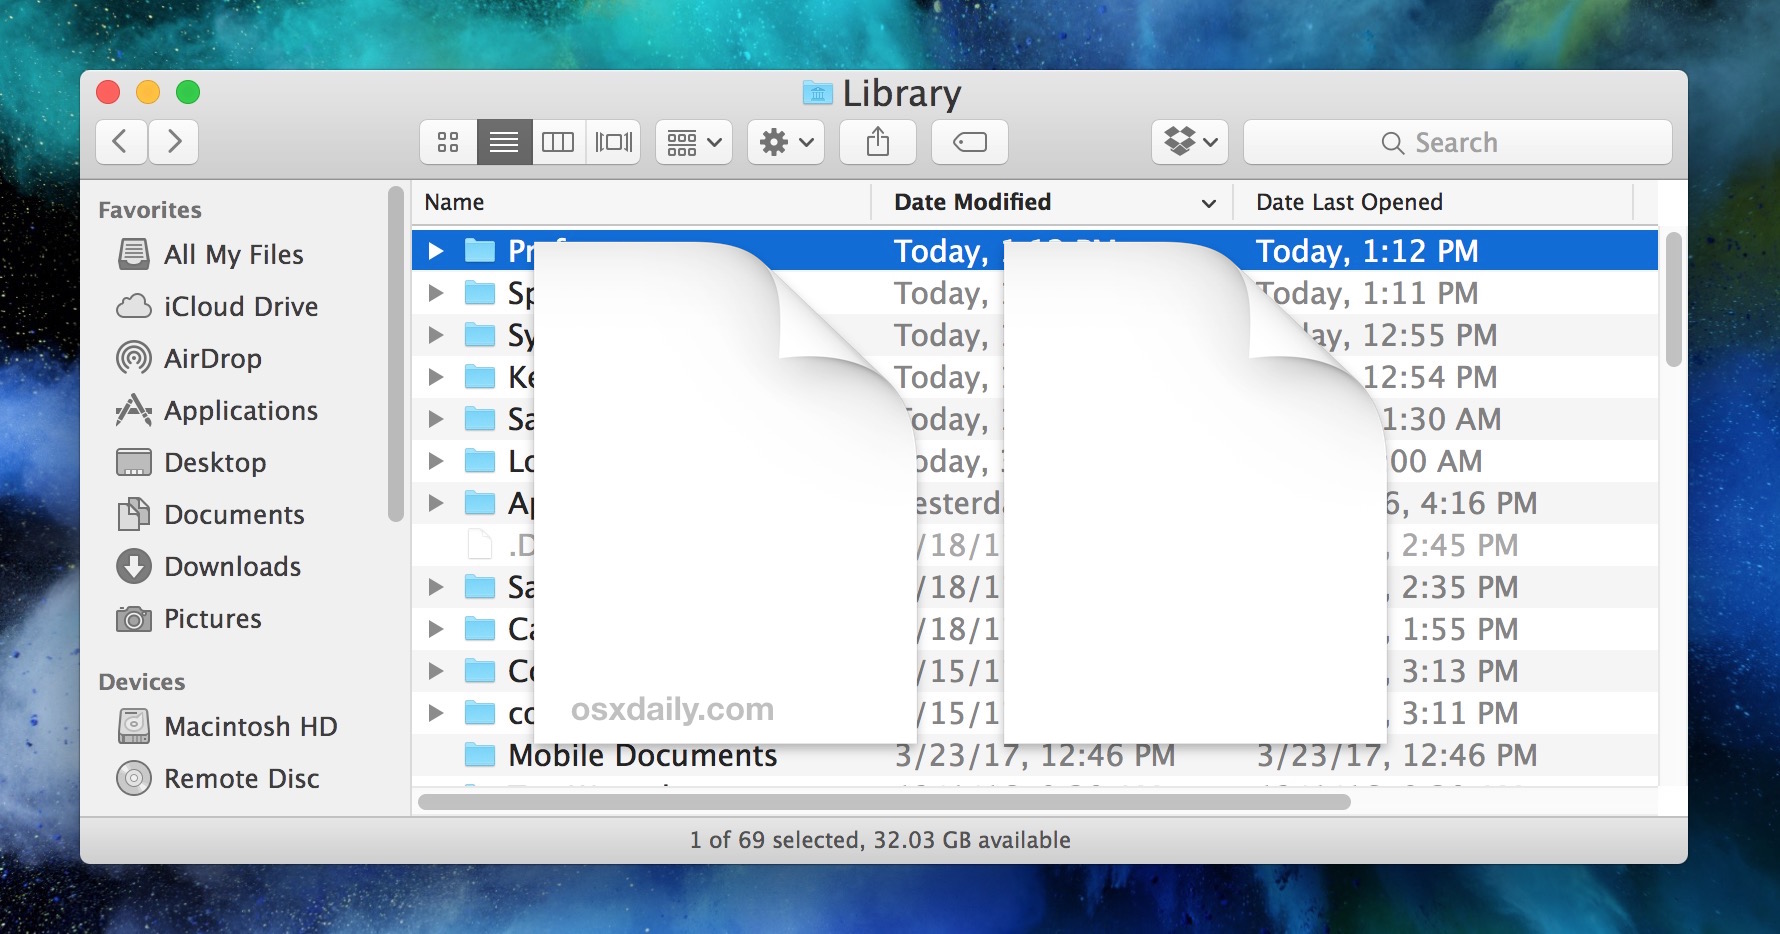 Use the built-in Finder tool to search for files with the same name or content.
Sort files by size or date modified to easily identify duplicates.